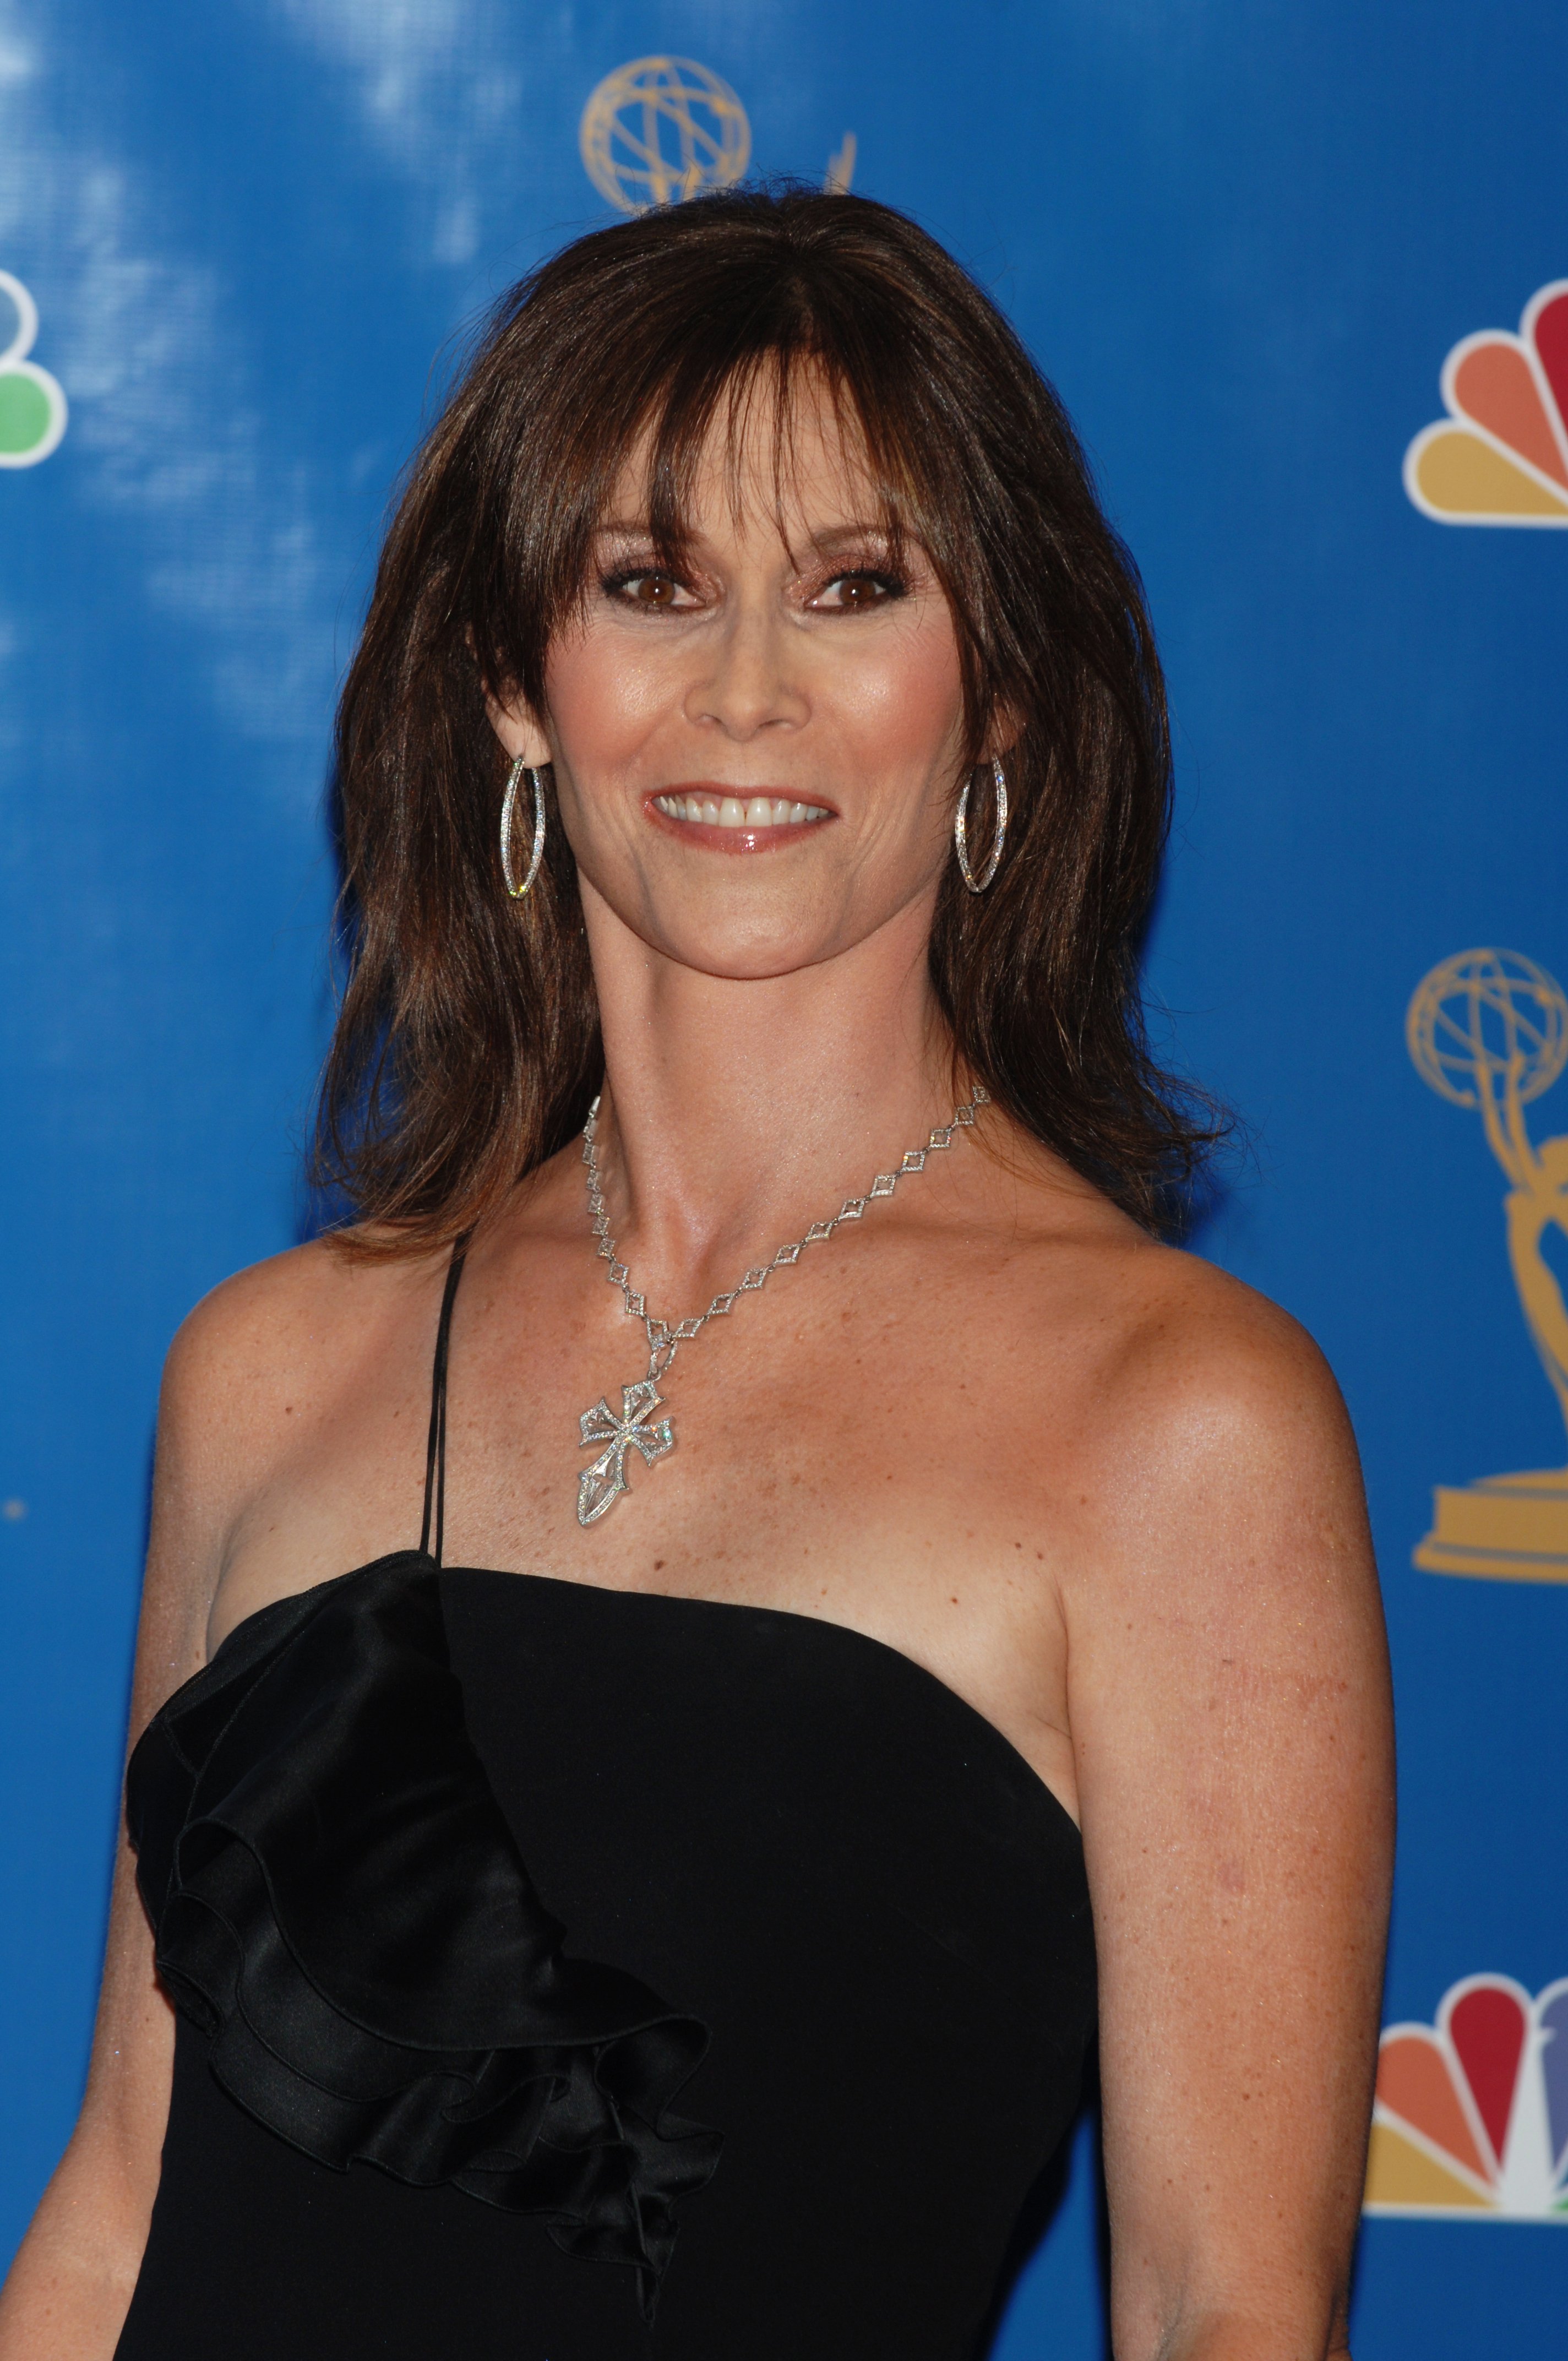 Actress Kate Jackson, presenter at the Primetime Emmy Awards held at the Shrine Auditorium. | Source: Getty Images